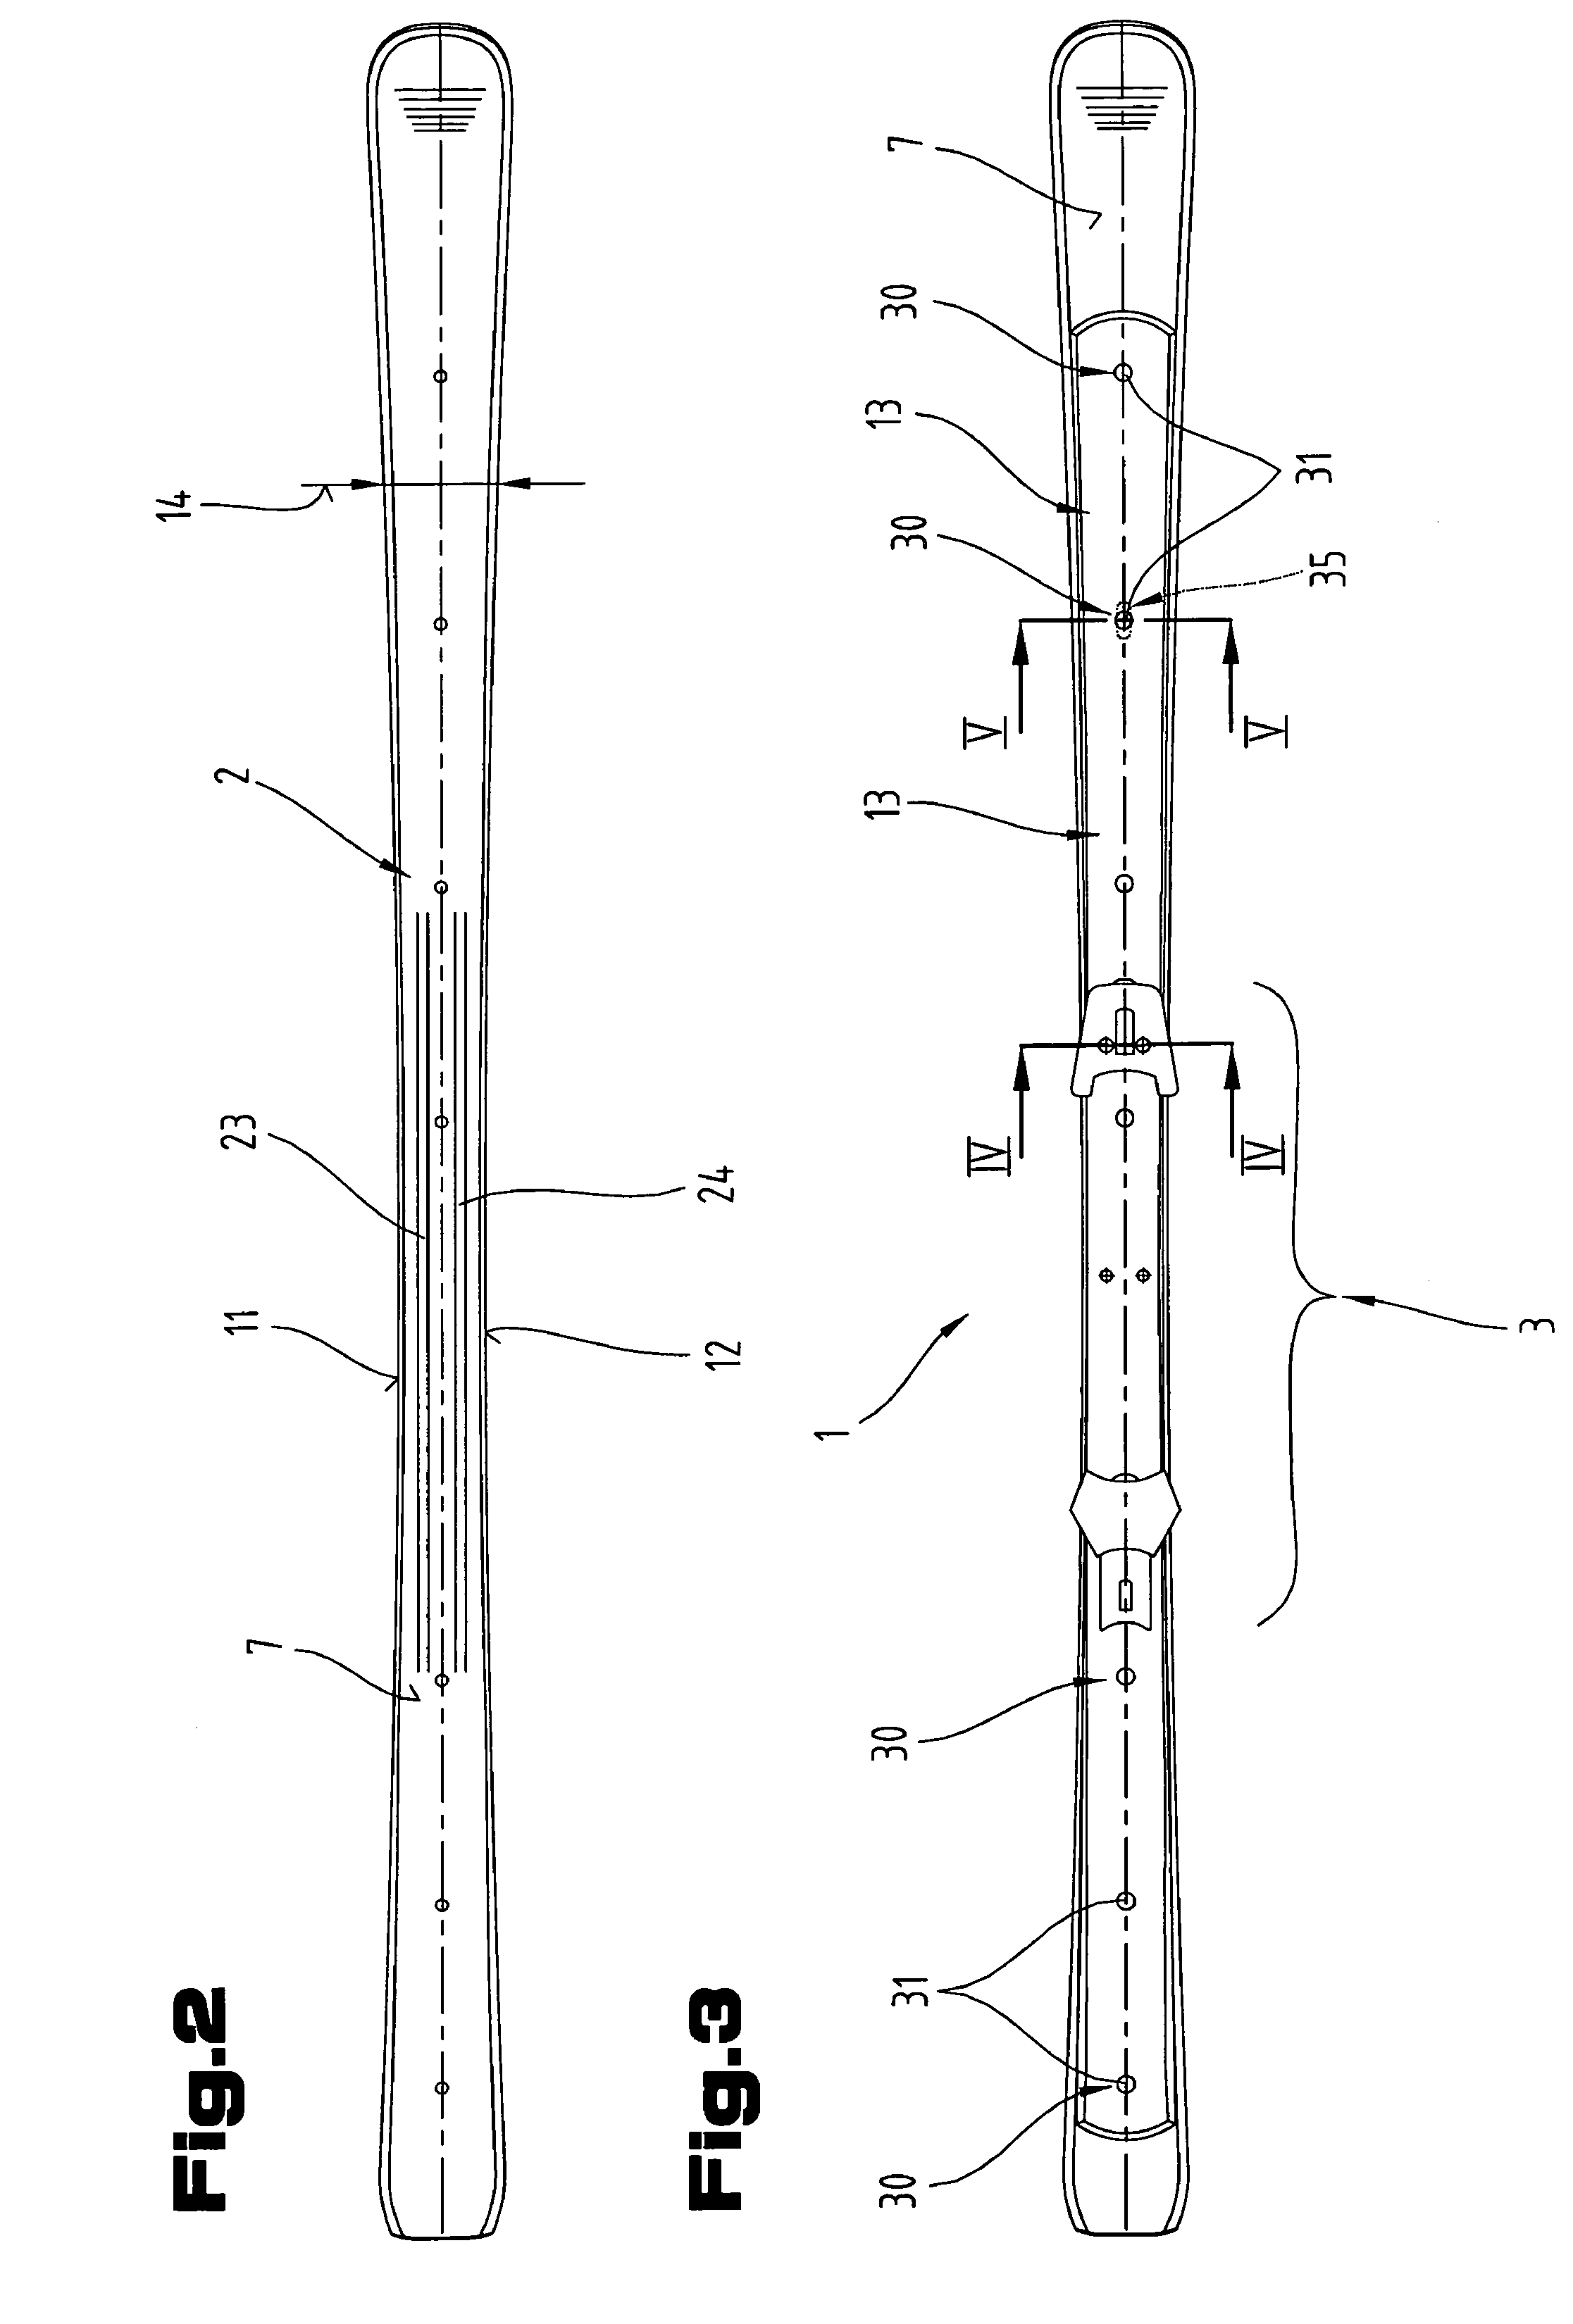 Ski or snowboard with a plate-type force-transmitting element